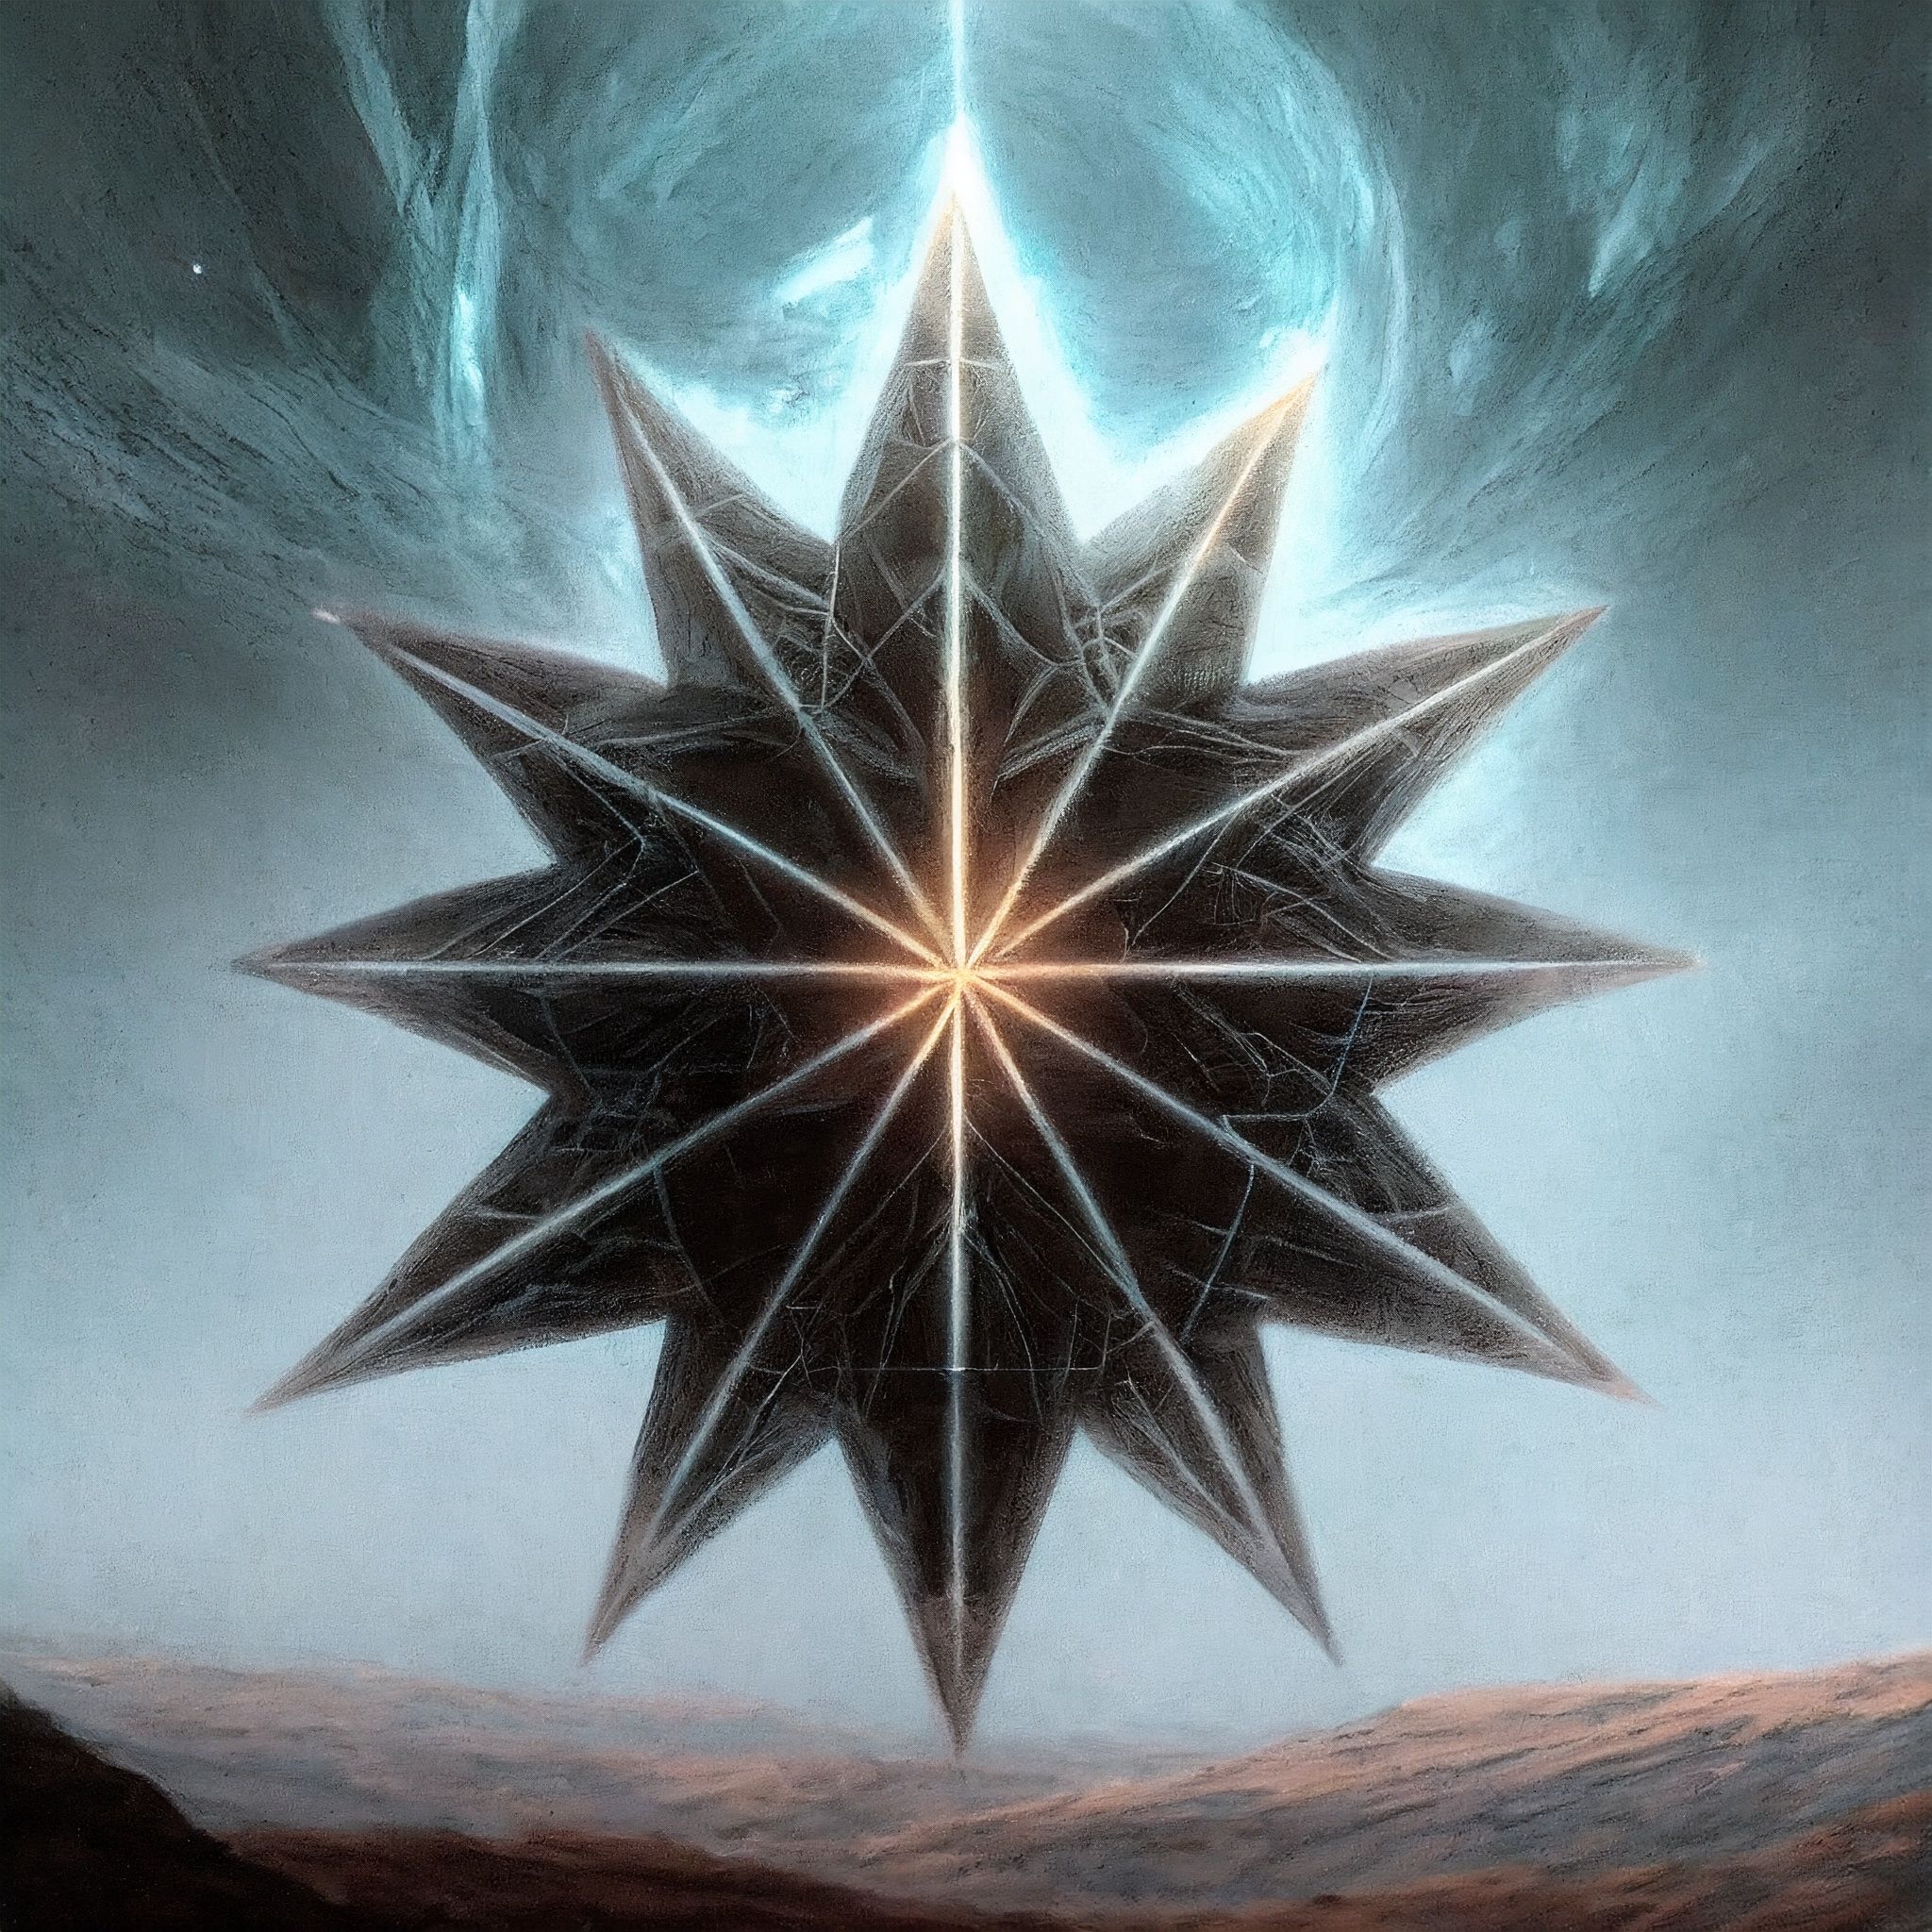 The 12-sided Pantheon star of Olympus.